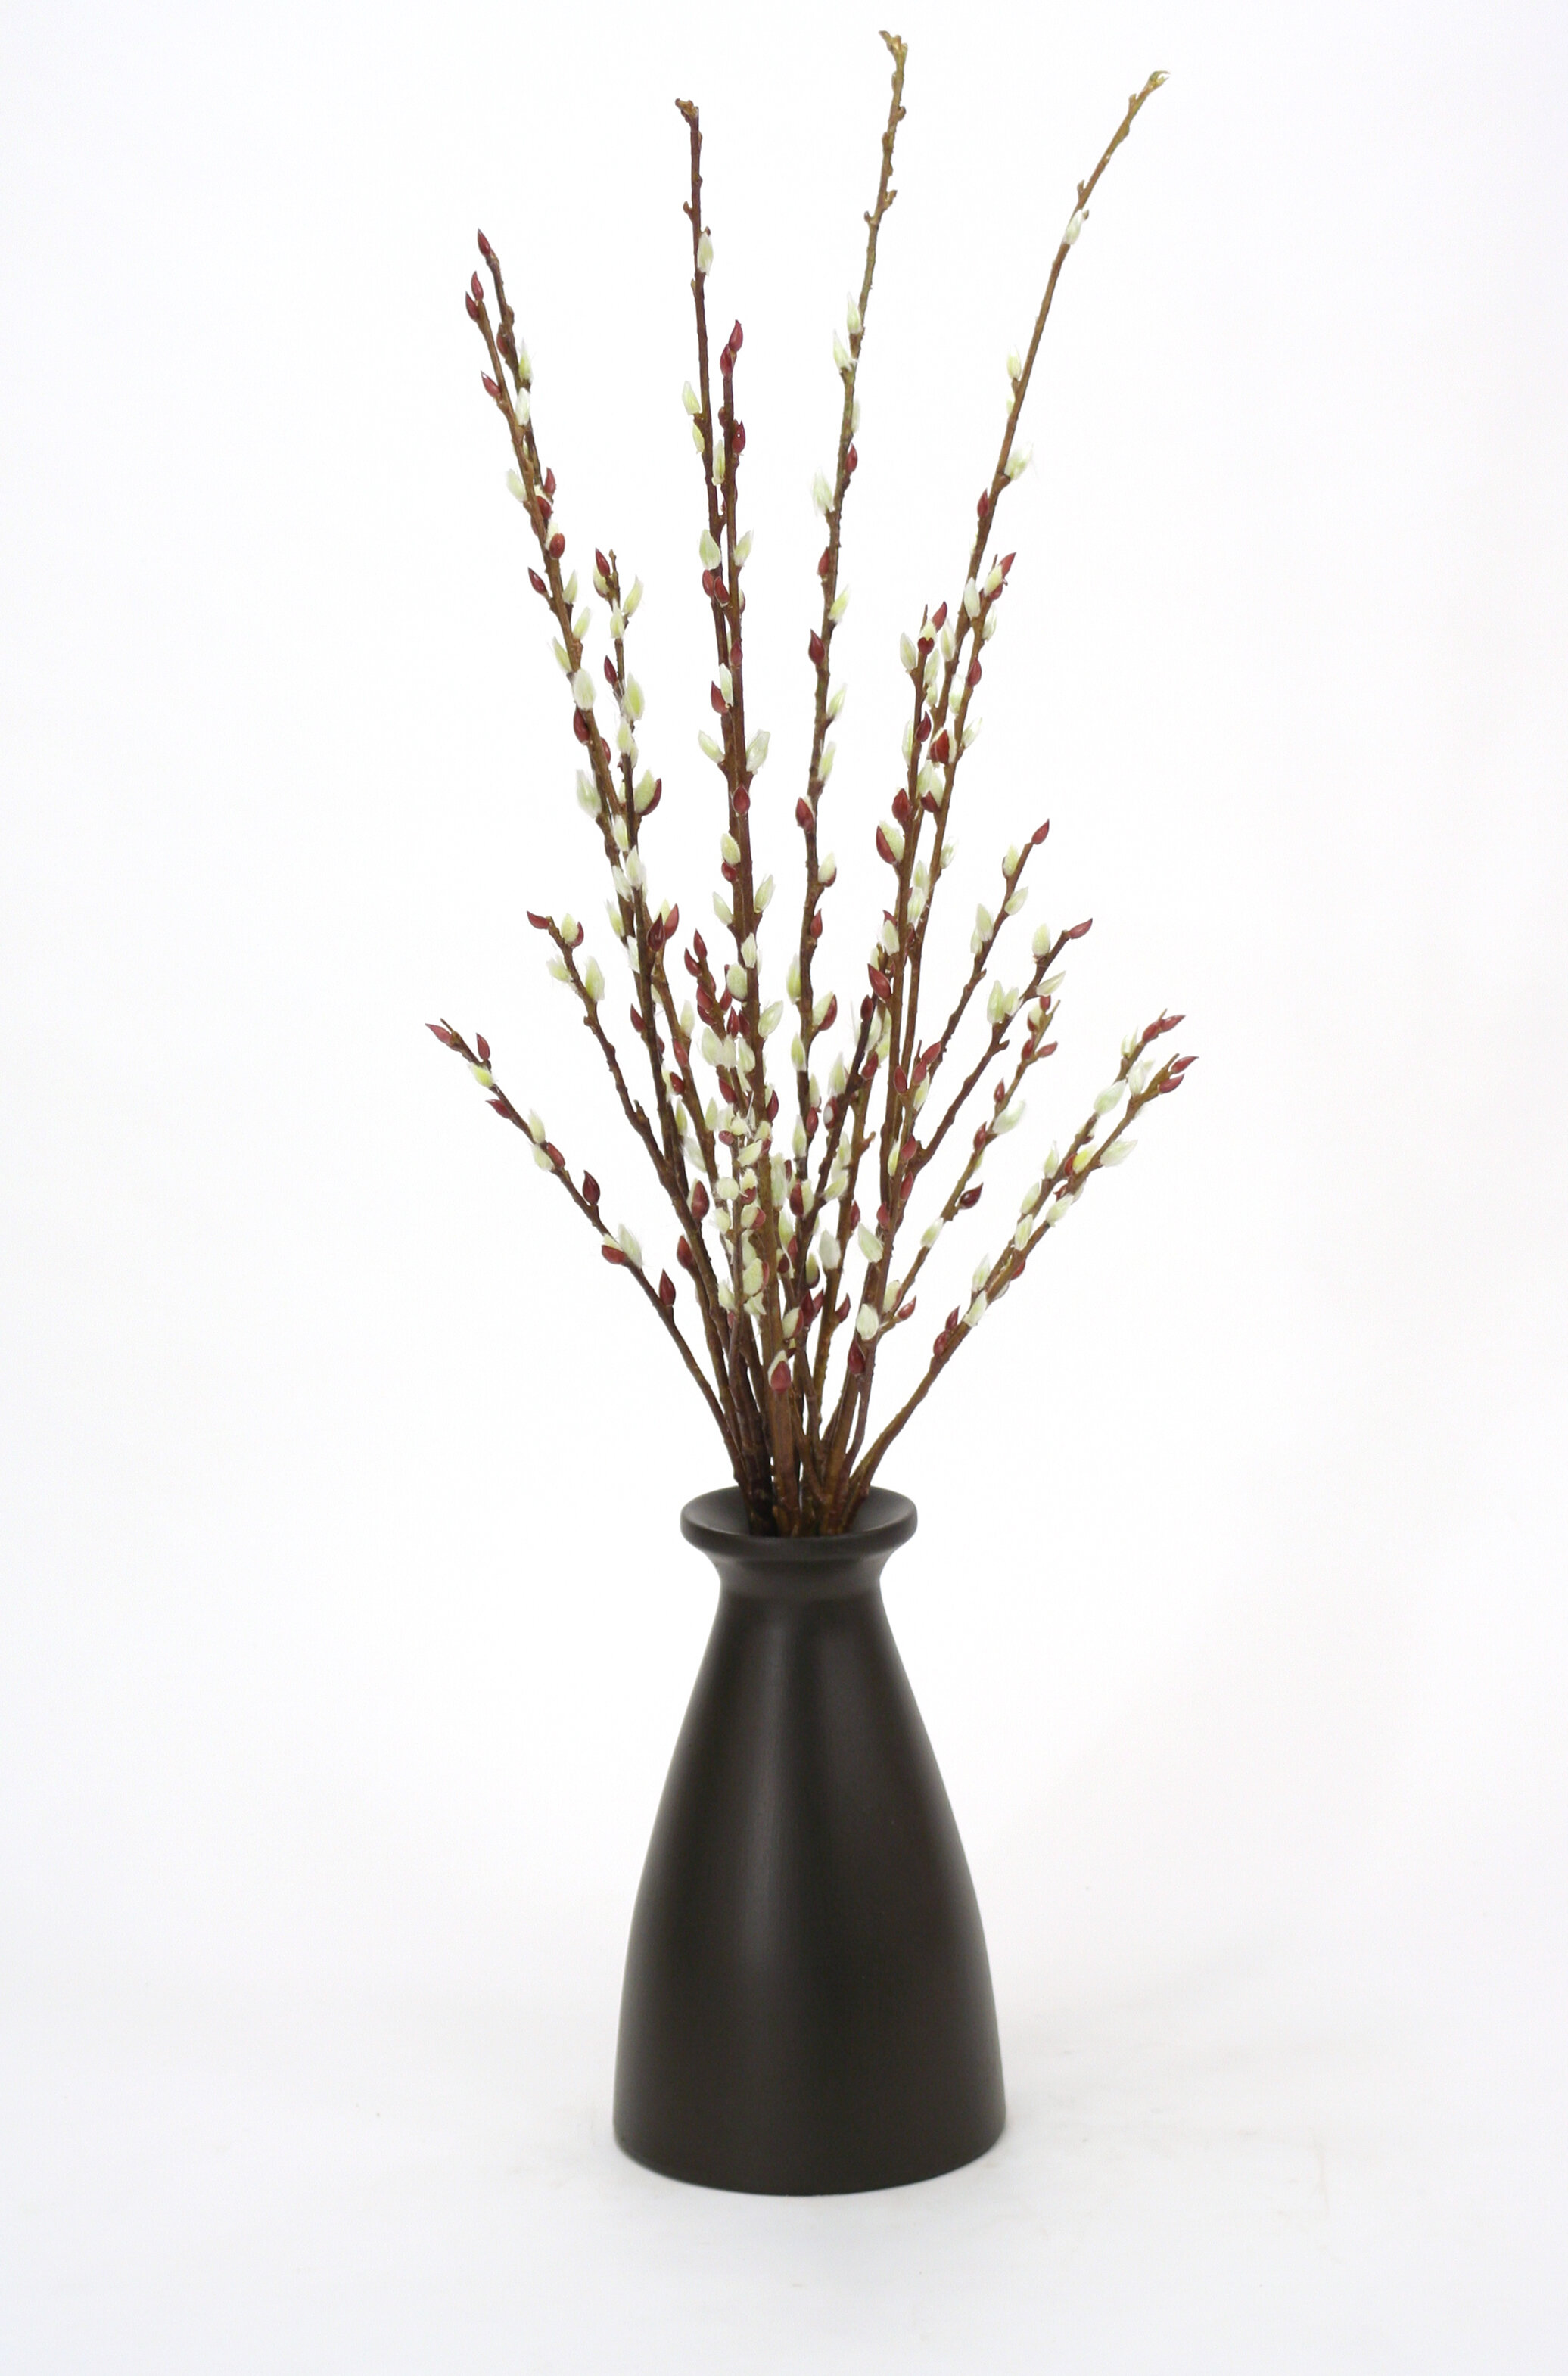  ACOOH 6Pcs Artificial Pussy Willow Branches for Vases